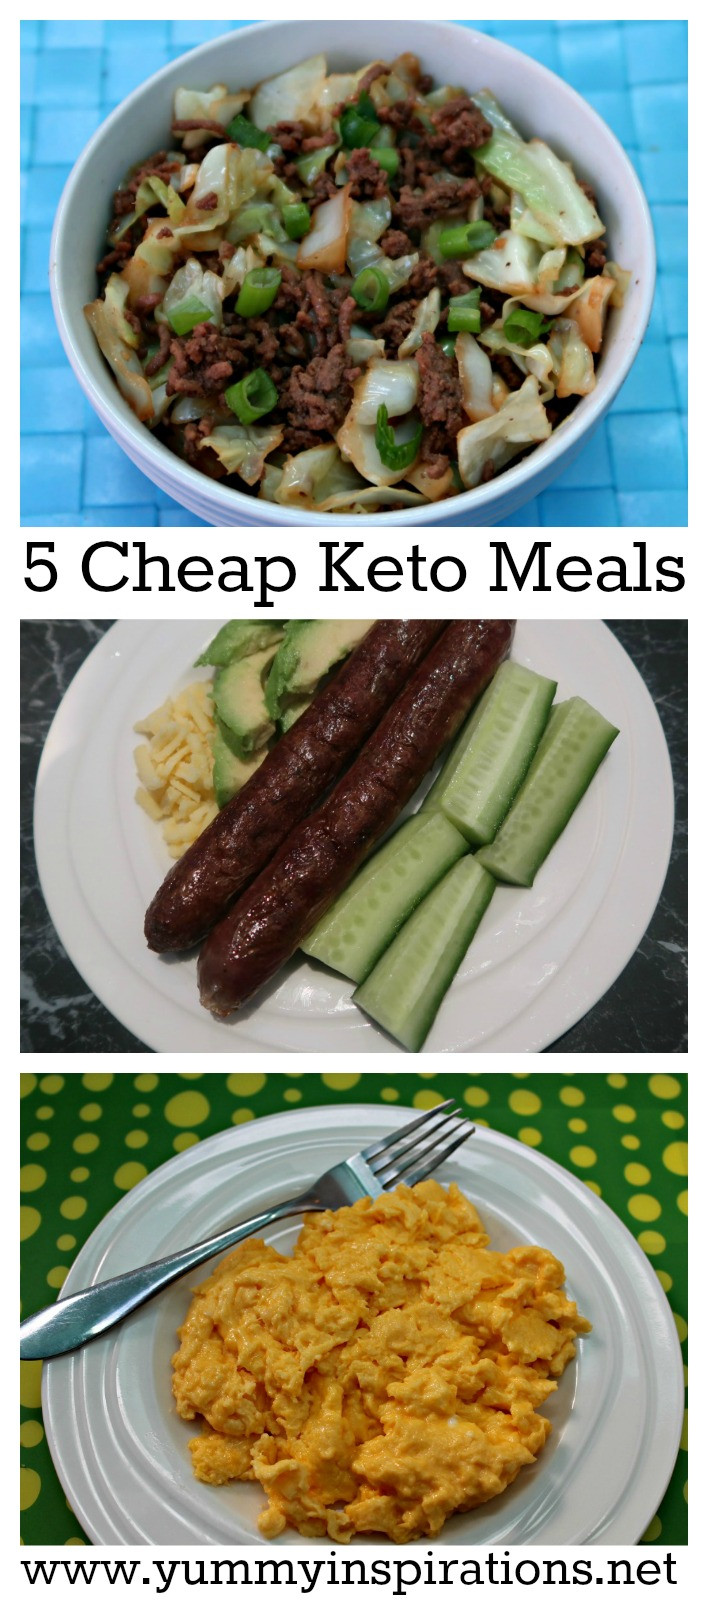 Keto Diet On A Budget
 5 Cheap Keto Meals Low Carb Keto Diet Foods A Bud